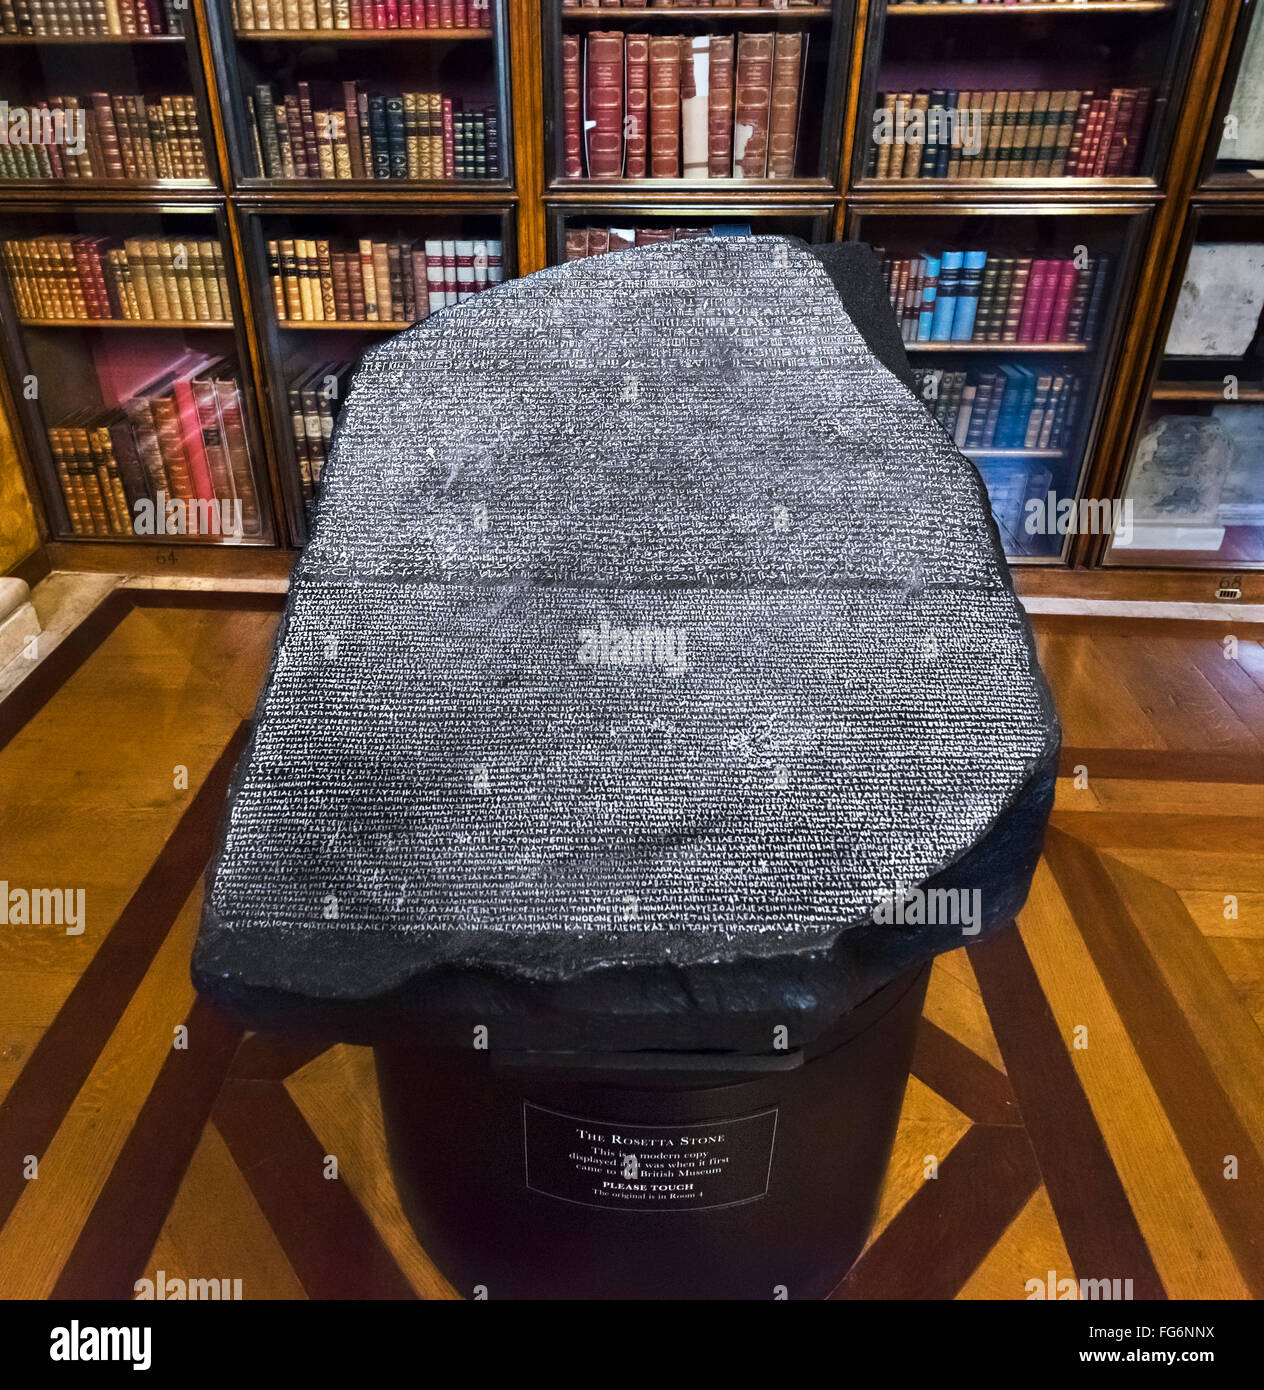 Replica of the Rosetta Stone, displayed as it was when first in the museum, Enlightenment Gallery, British Museum, London, UK Stock Photo